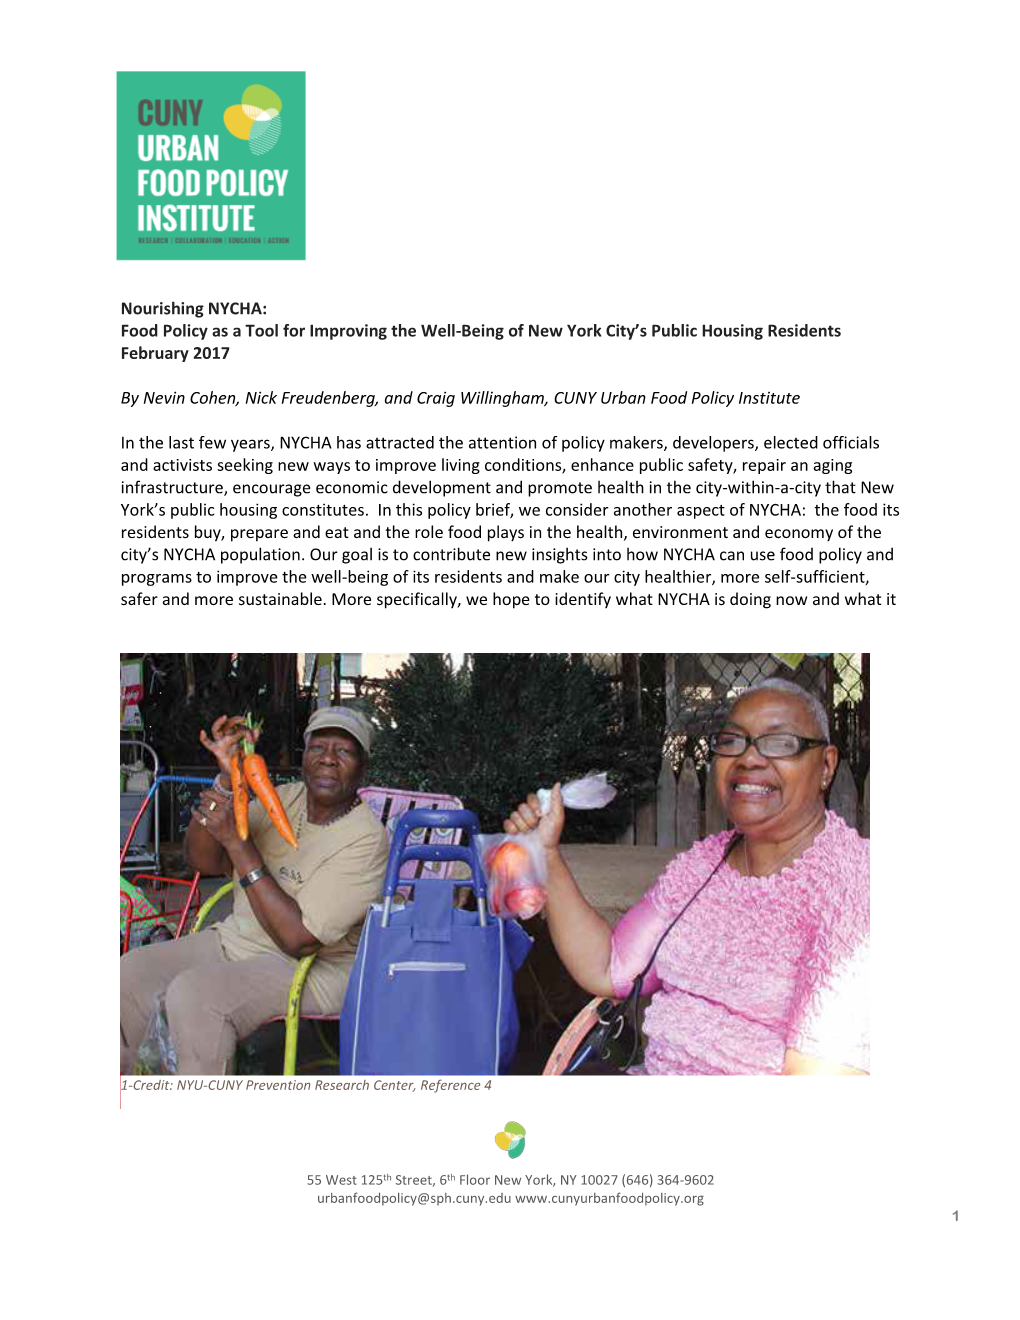 Nourishing NYCHA: Food Policy As a Tool for Improving the Well-Being of New York City’S Public Housing Residents February 2017